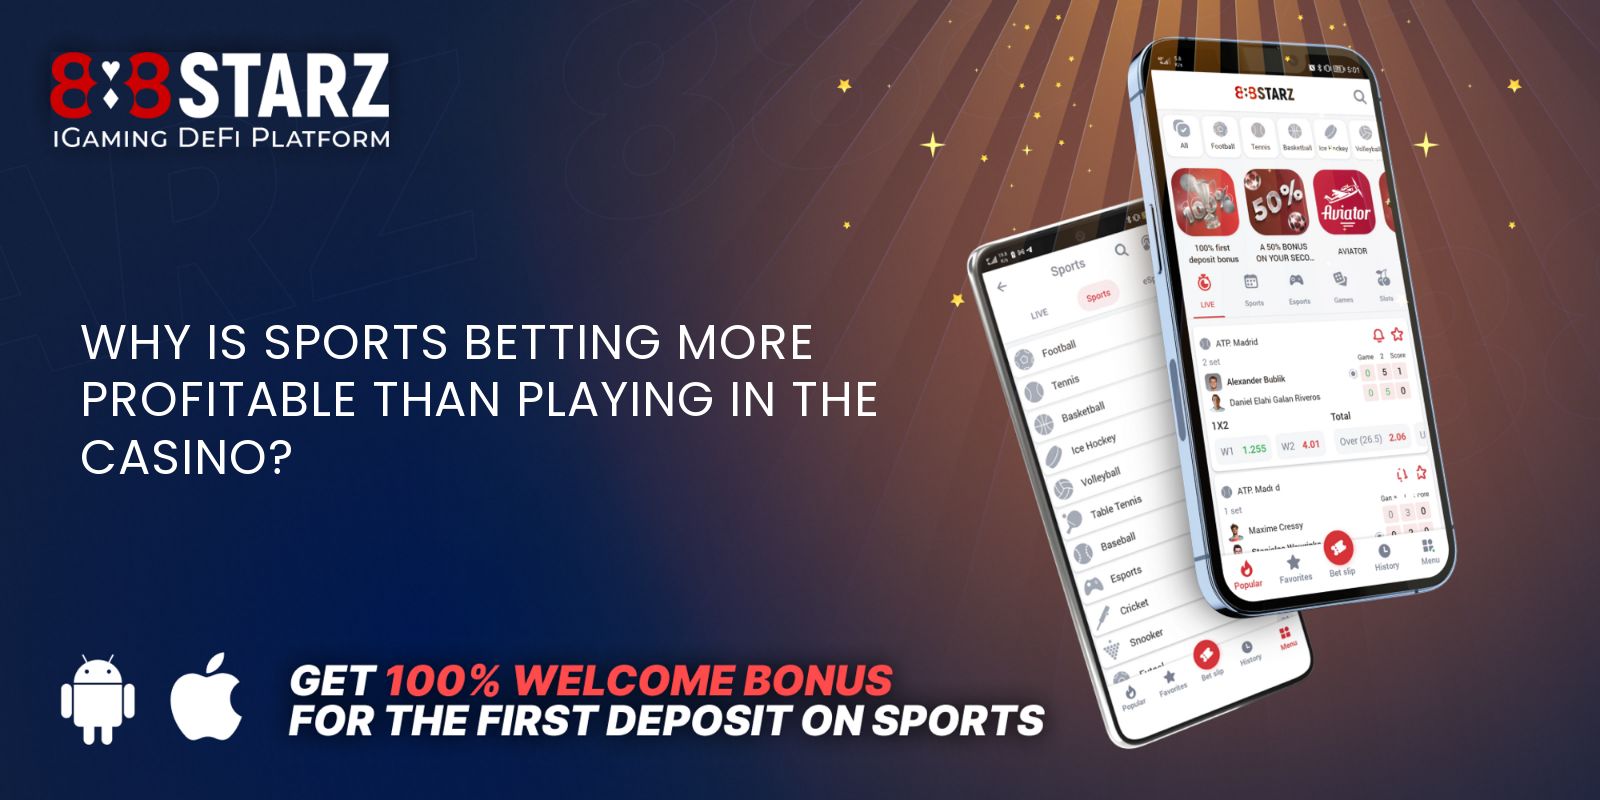 Why is sports betting more profitable than playing in the casino?